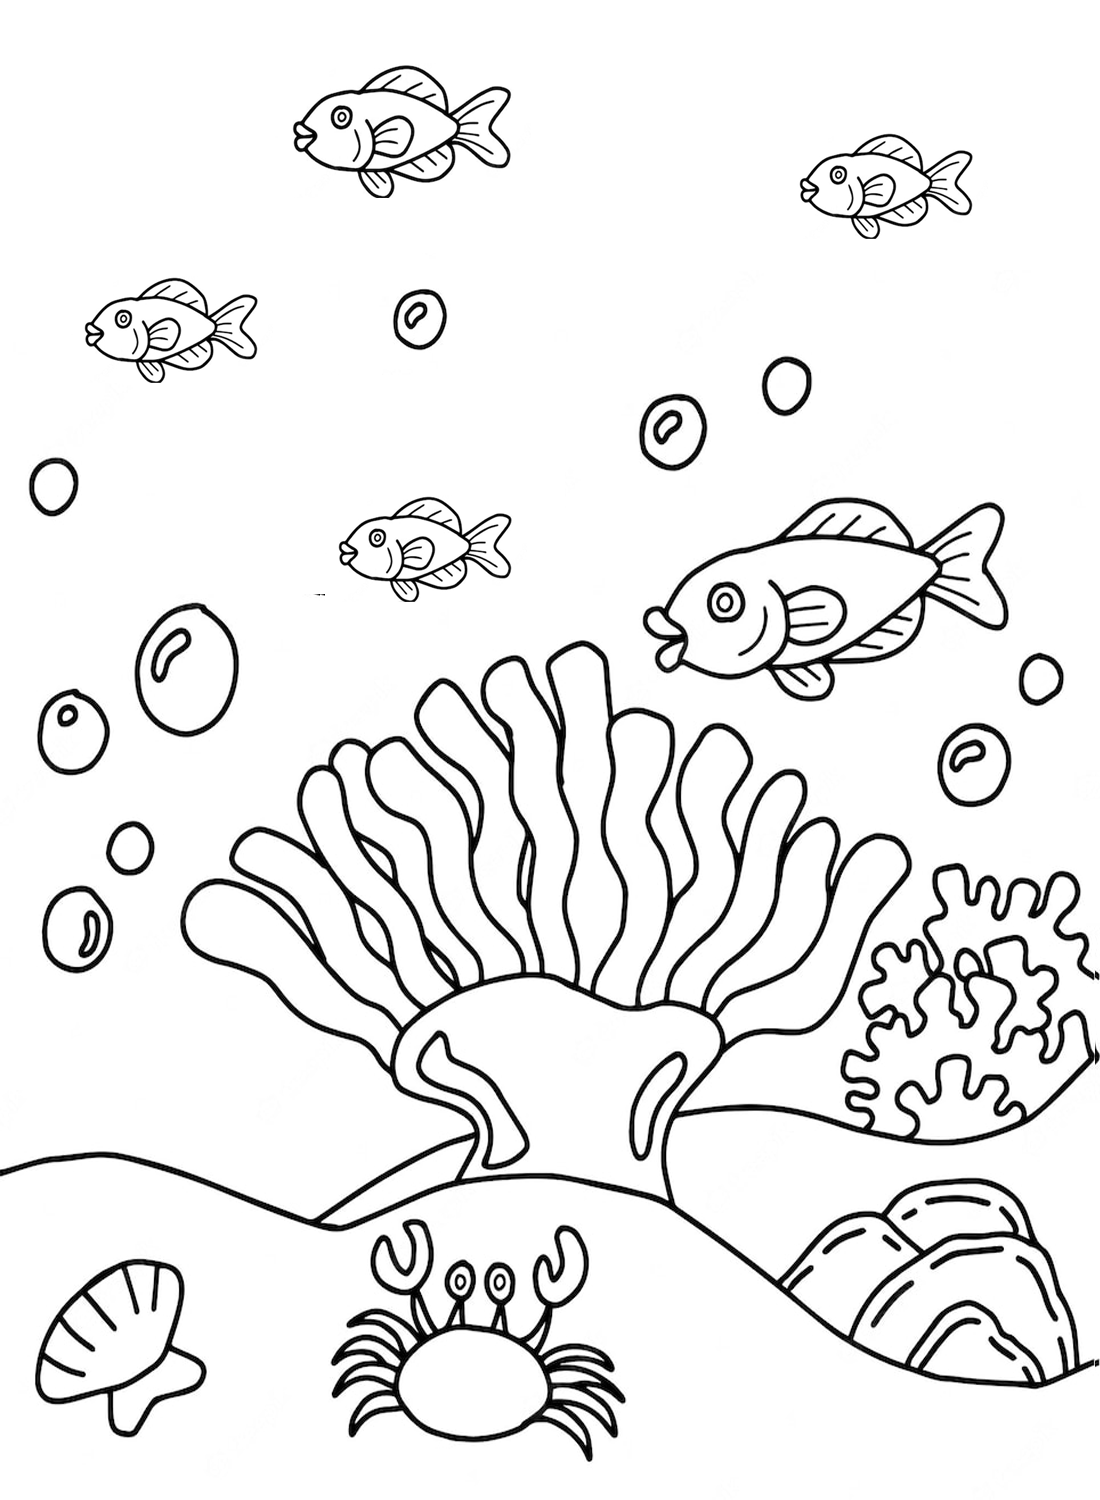 Coral and fishes Coloring Page